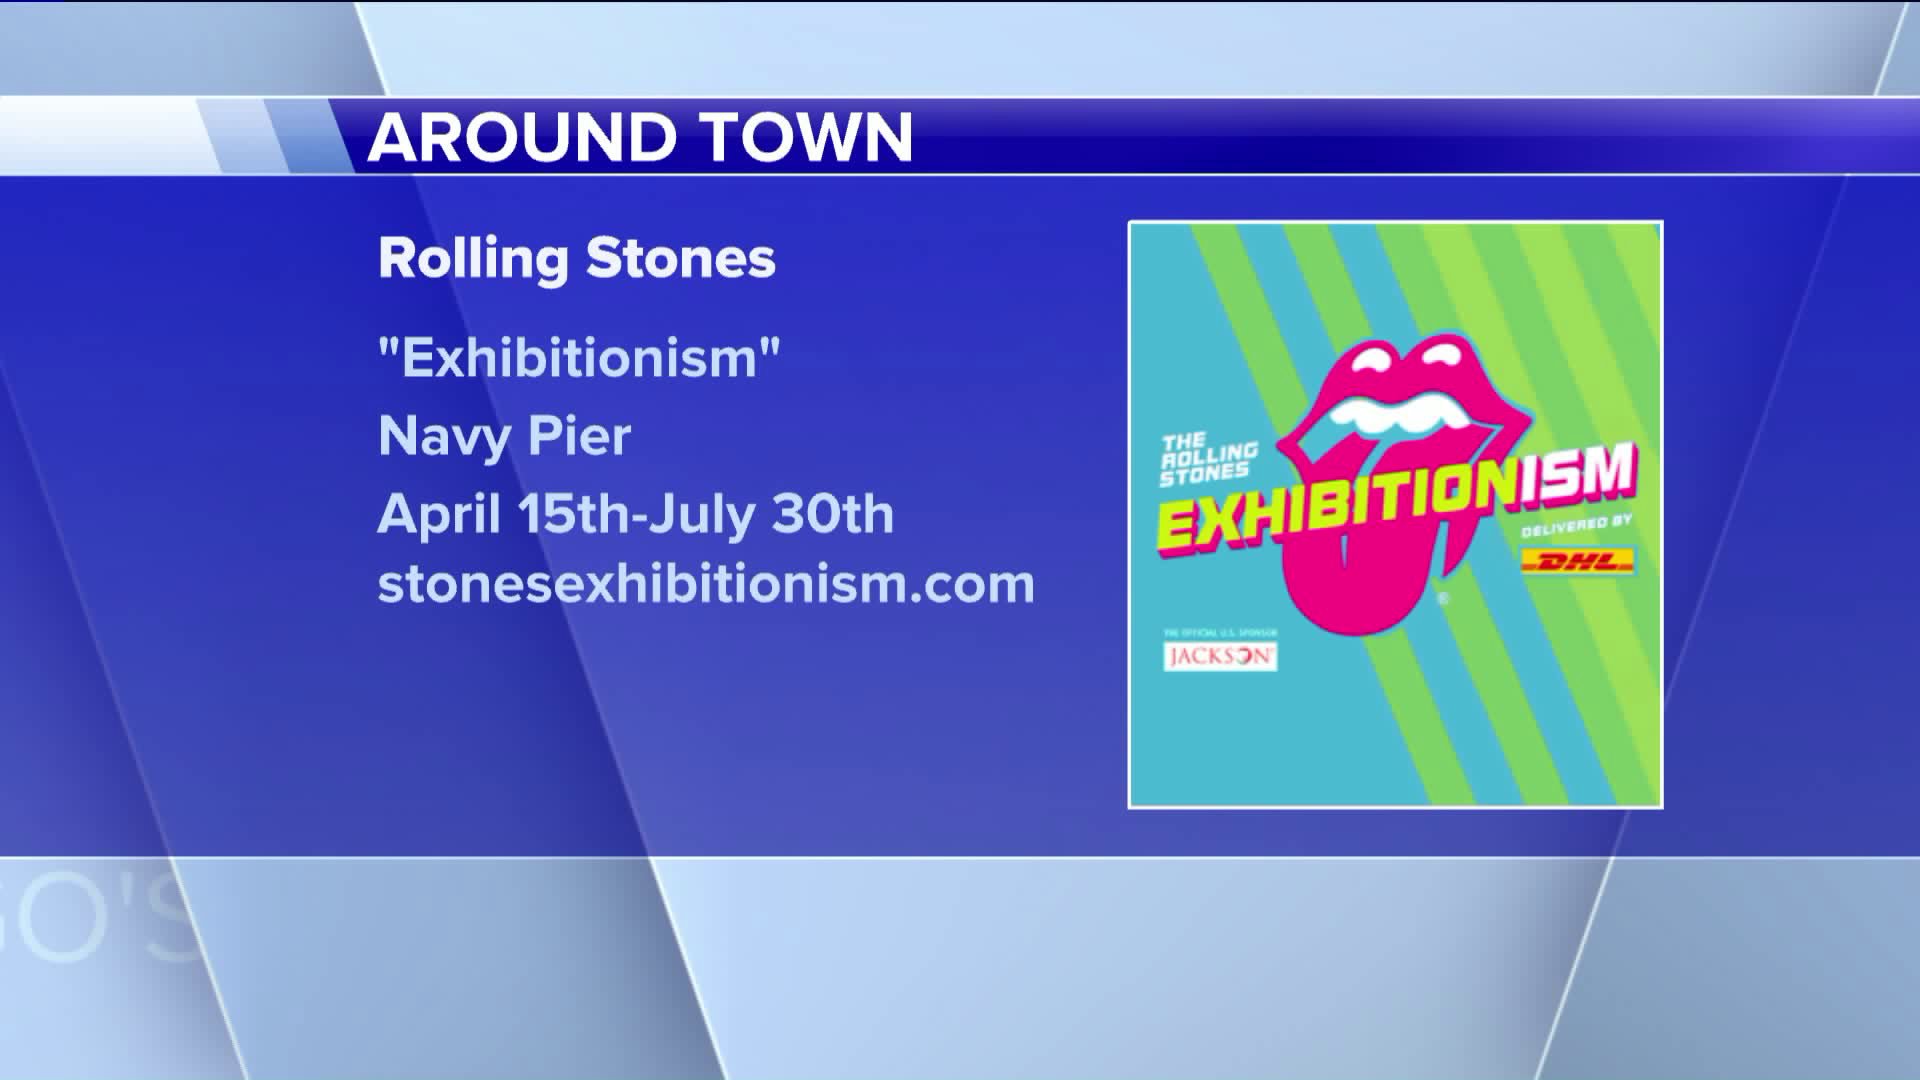 Around Town at The Rolling Stones Exhibition